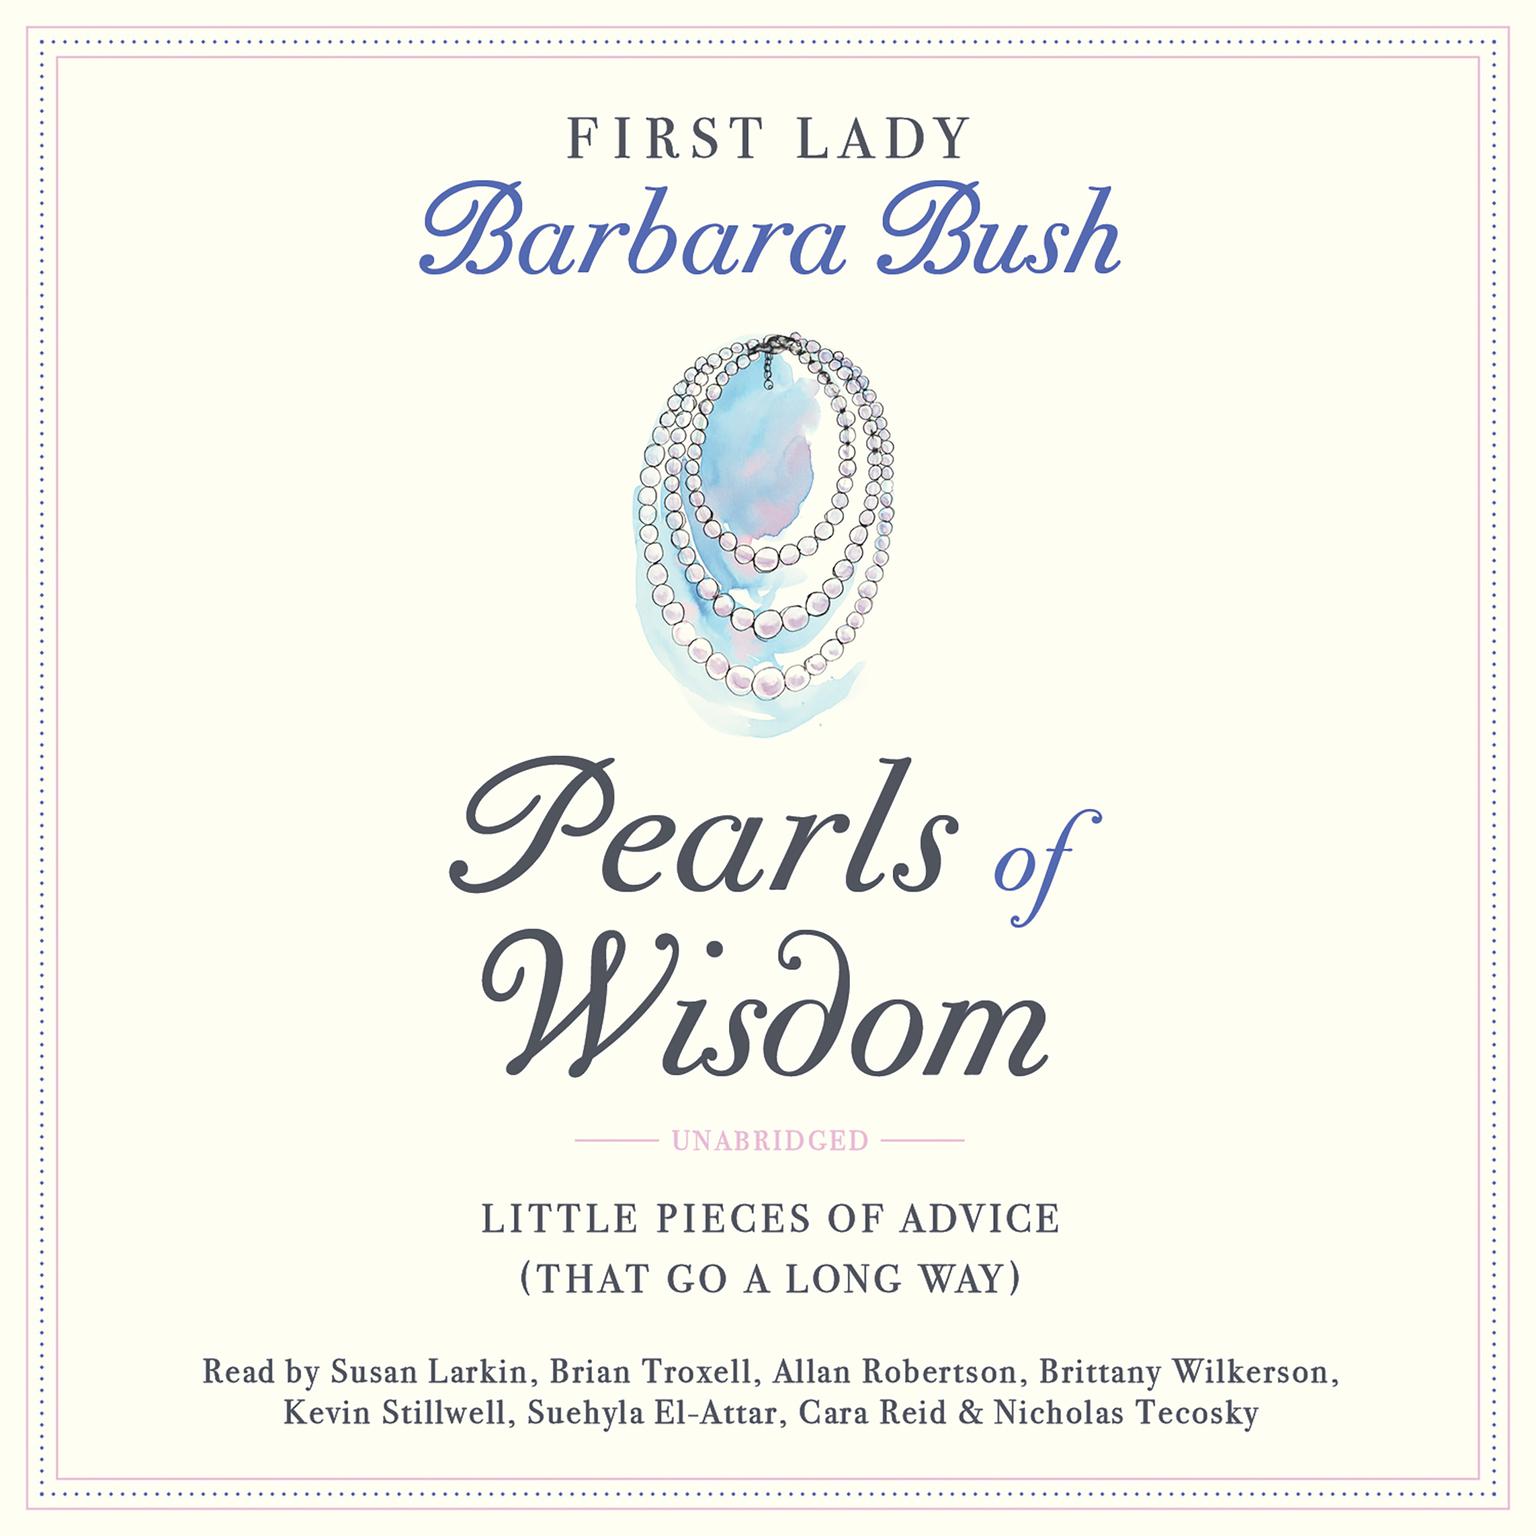 Pearls of Wisdom: Little Pieces of Advice (That Go a Long Way) Audiobook, by Barbara Bush